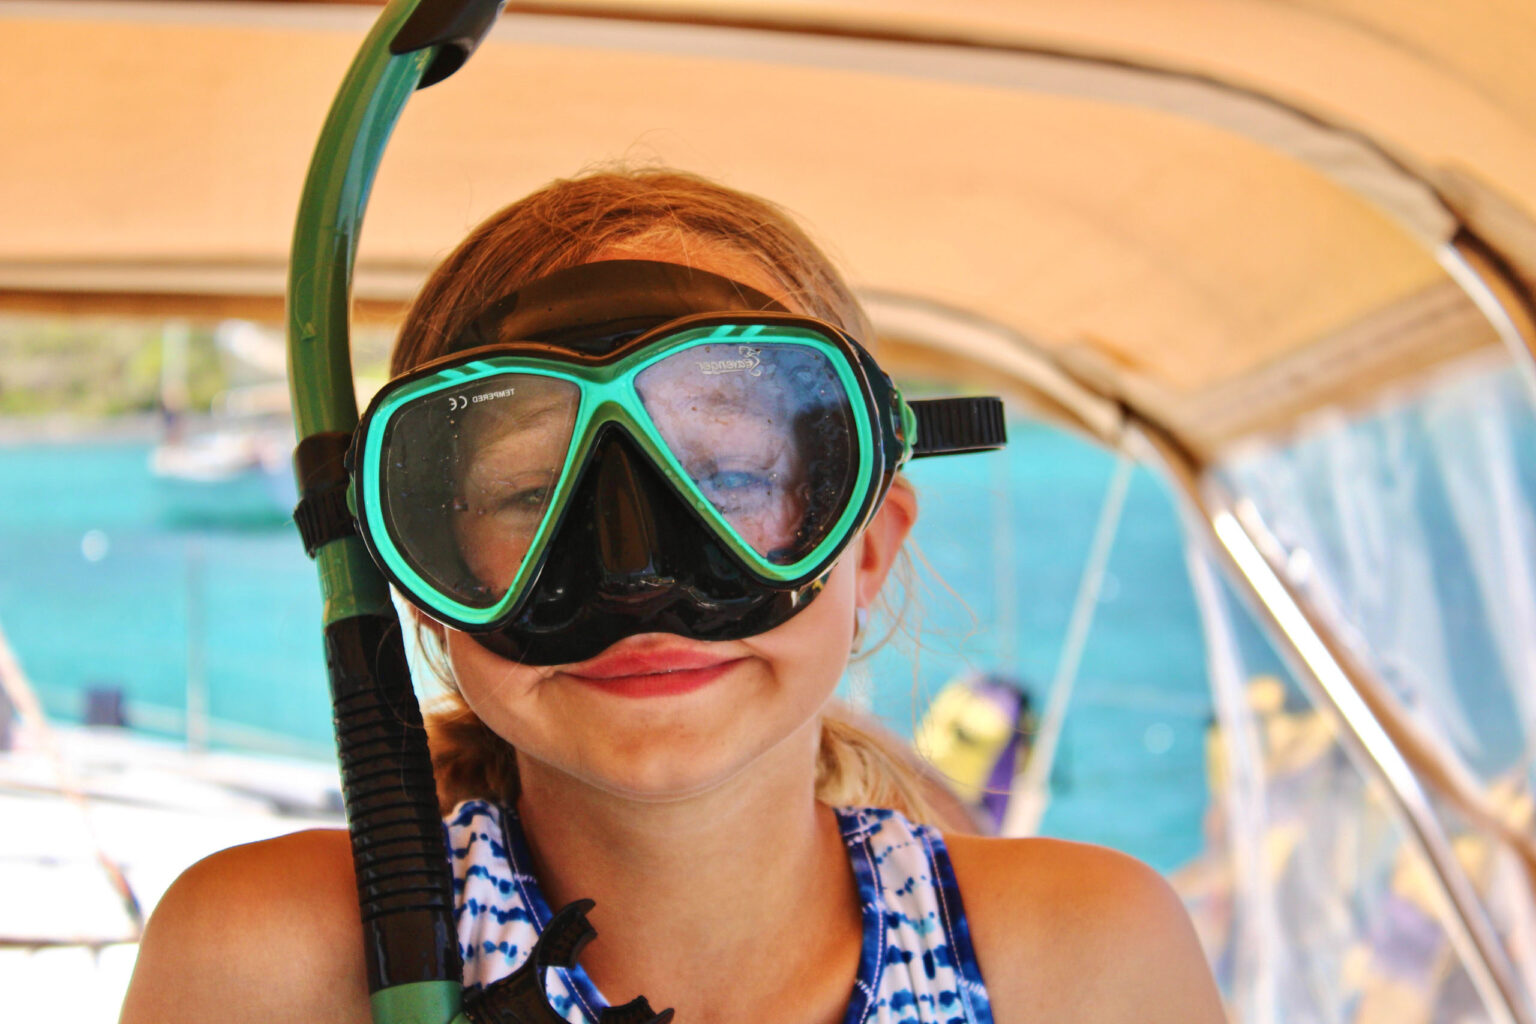 A young girl wearing a snorkel and snork on a boat.